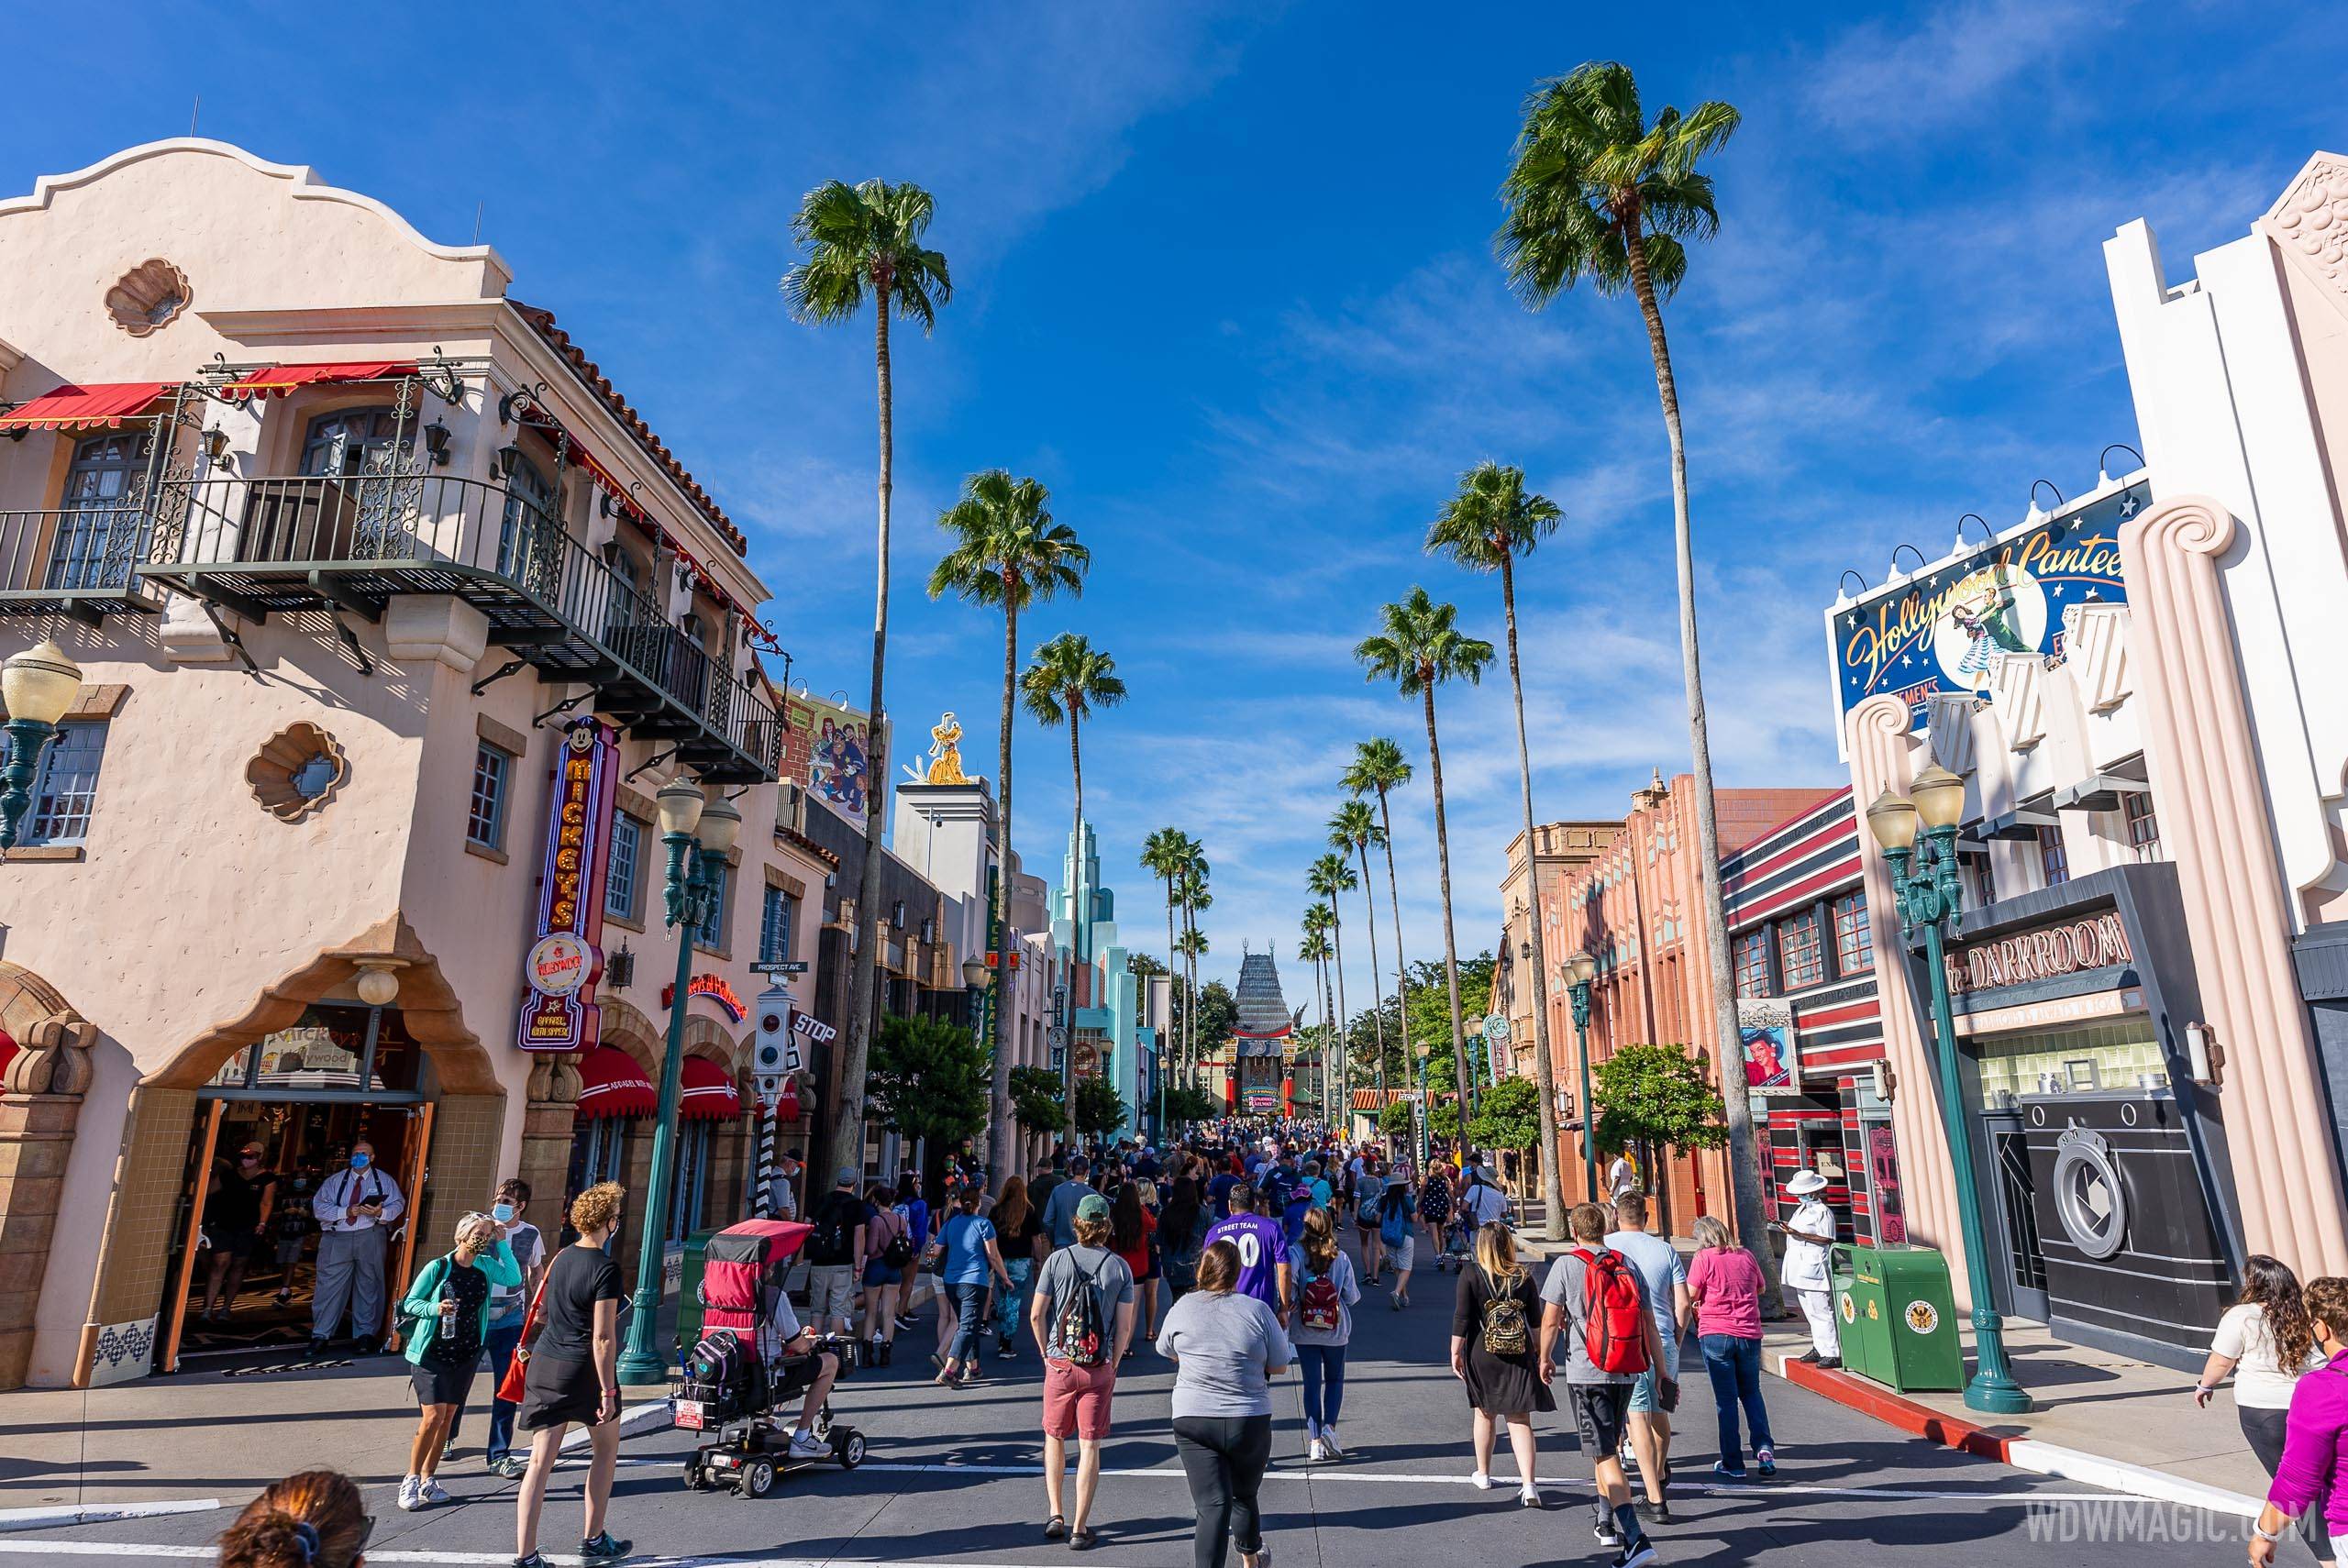 Walt Disney World theme parks increase capacity but see longer waits and less physical distancing